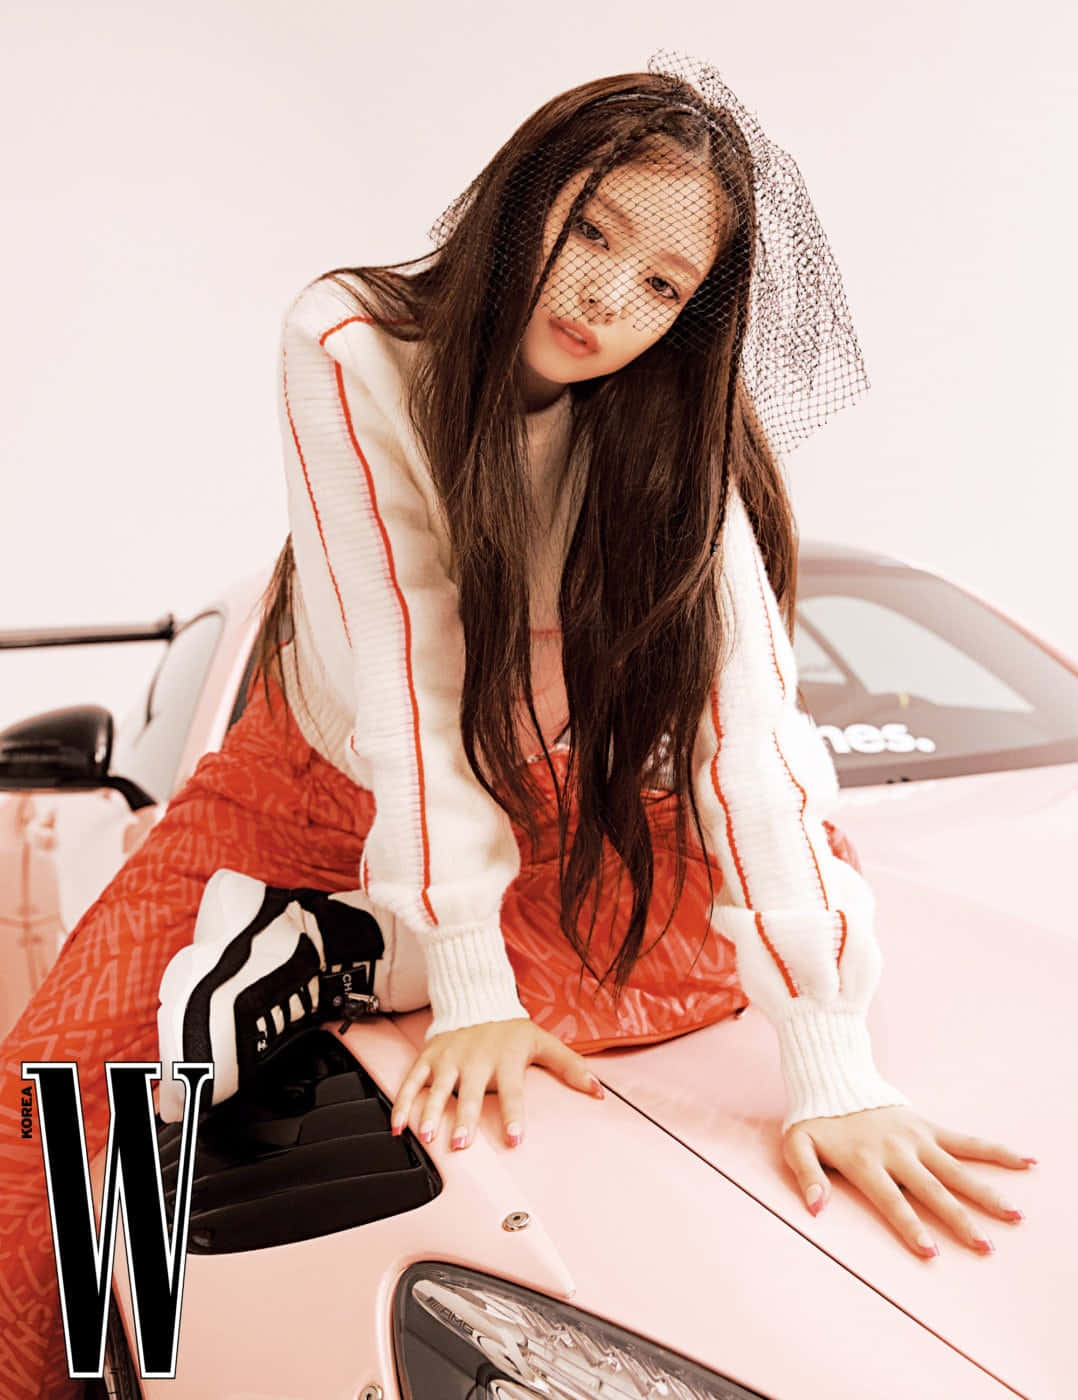 Jennie Of Blackpink For W Feature Picture